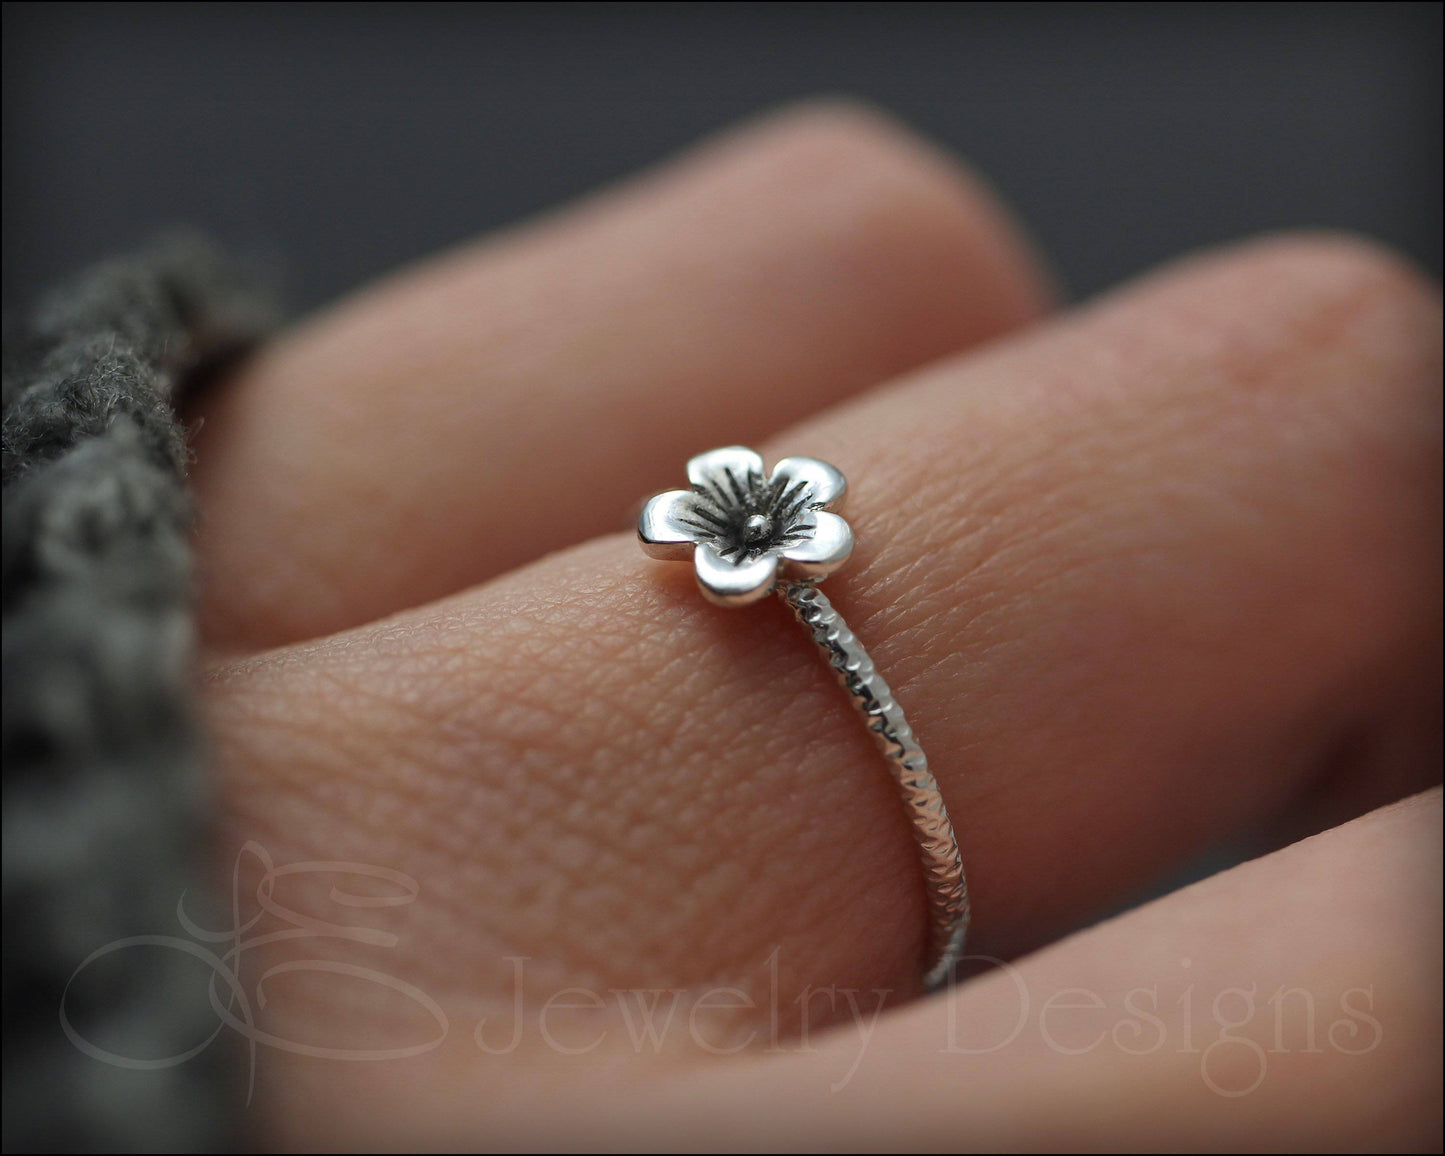 Load image into Gallery viewer, Dainty Cherry Blossom Ring - LE Jewelry Designs
